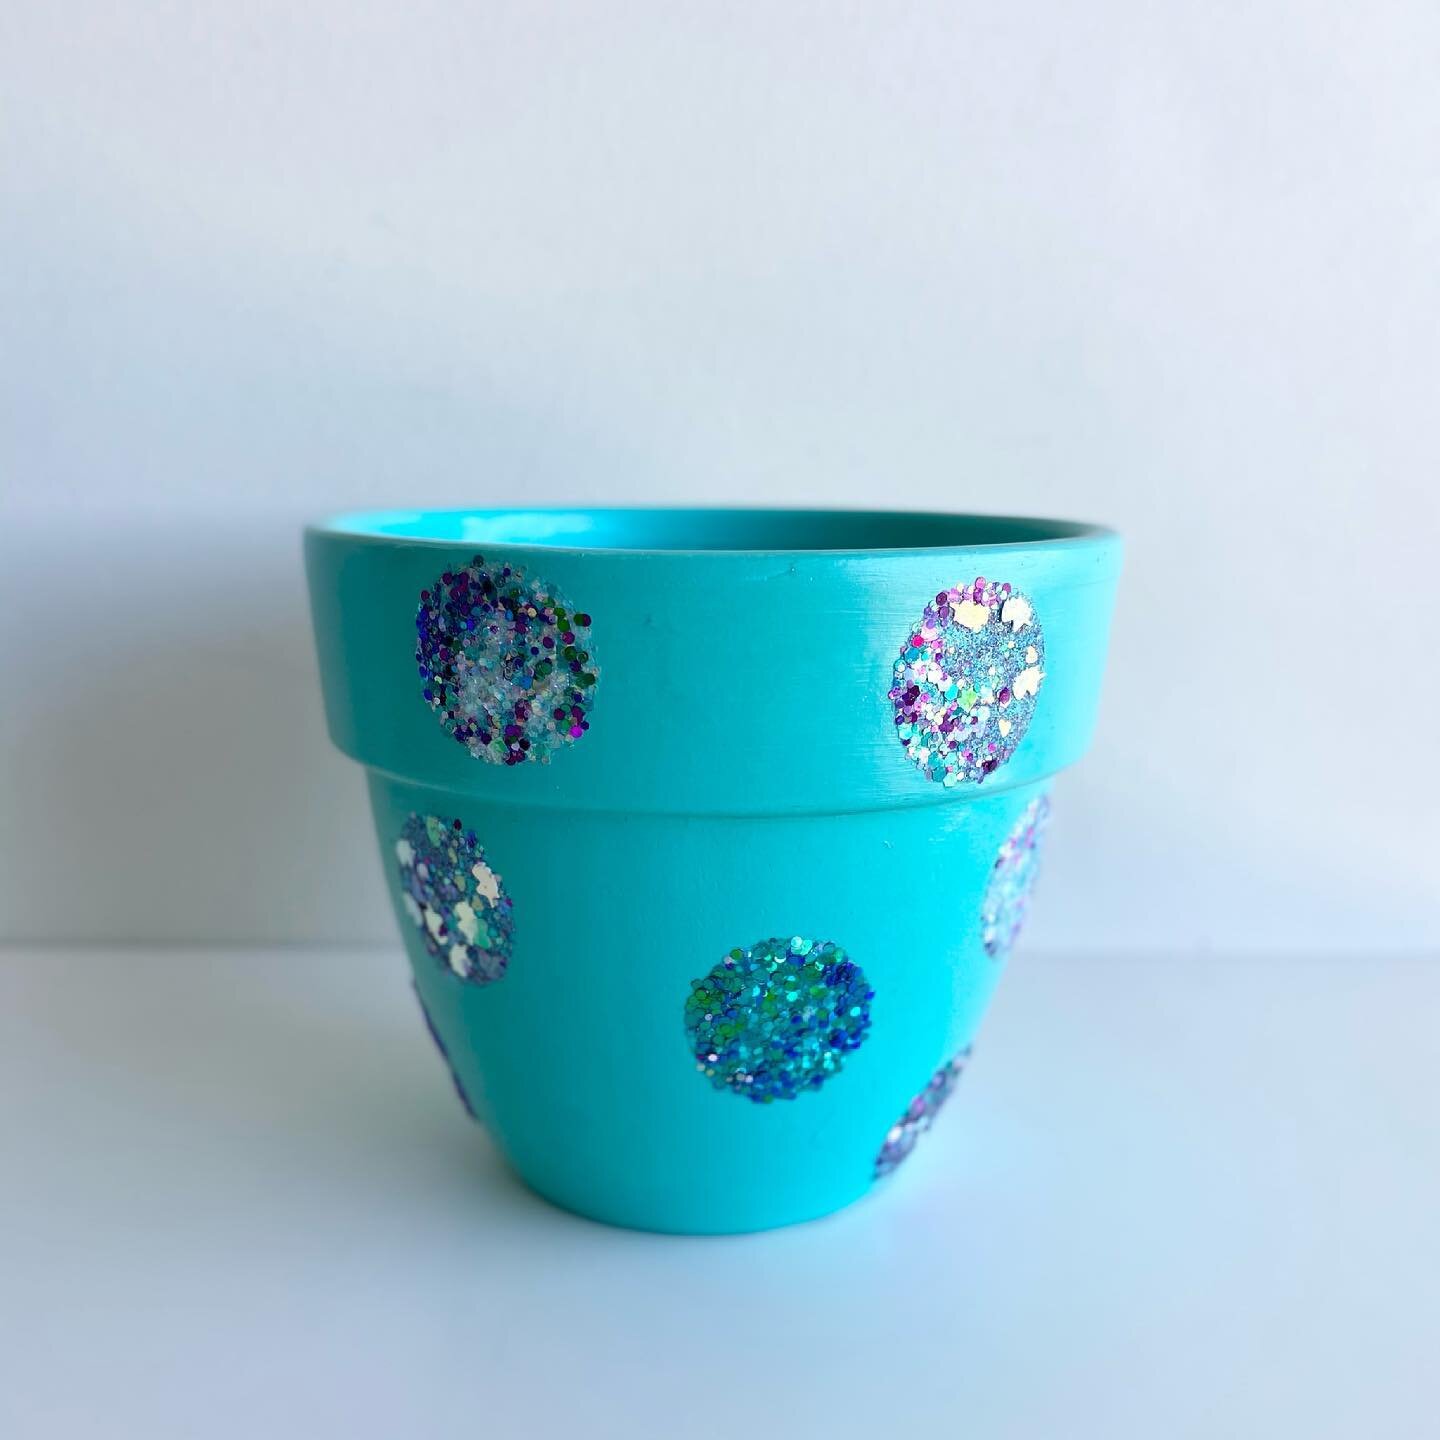 &lsquo;Twinkle twinkle sparkly pot, you were quite the tricky snot, your glitter has gone everywhere, on my feet and in my hair.&rsquo; Yep. Bad at poetry. Better at pots.
&bull;
This glitter pot is available for purchase on the website now (link in 